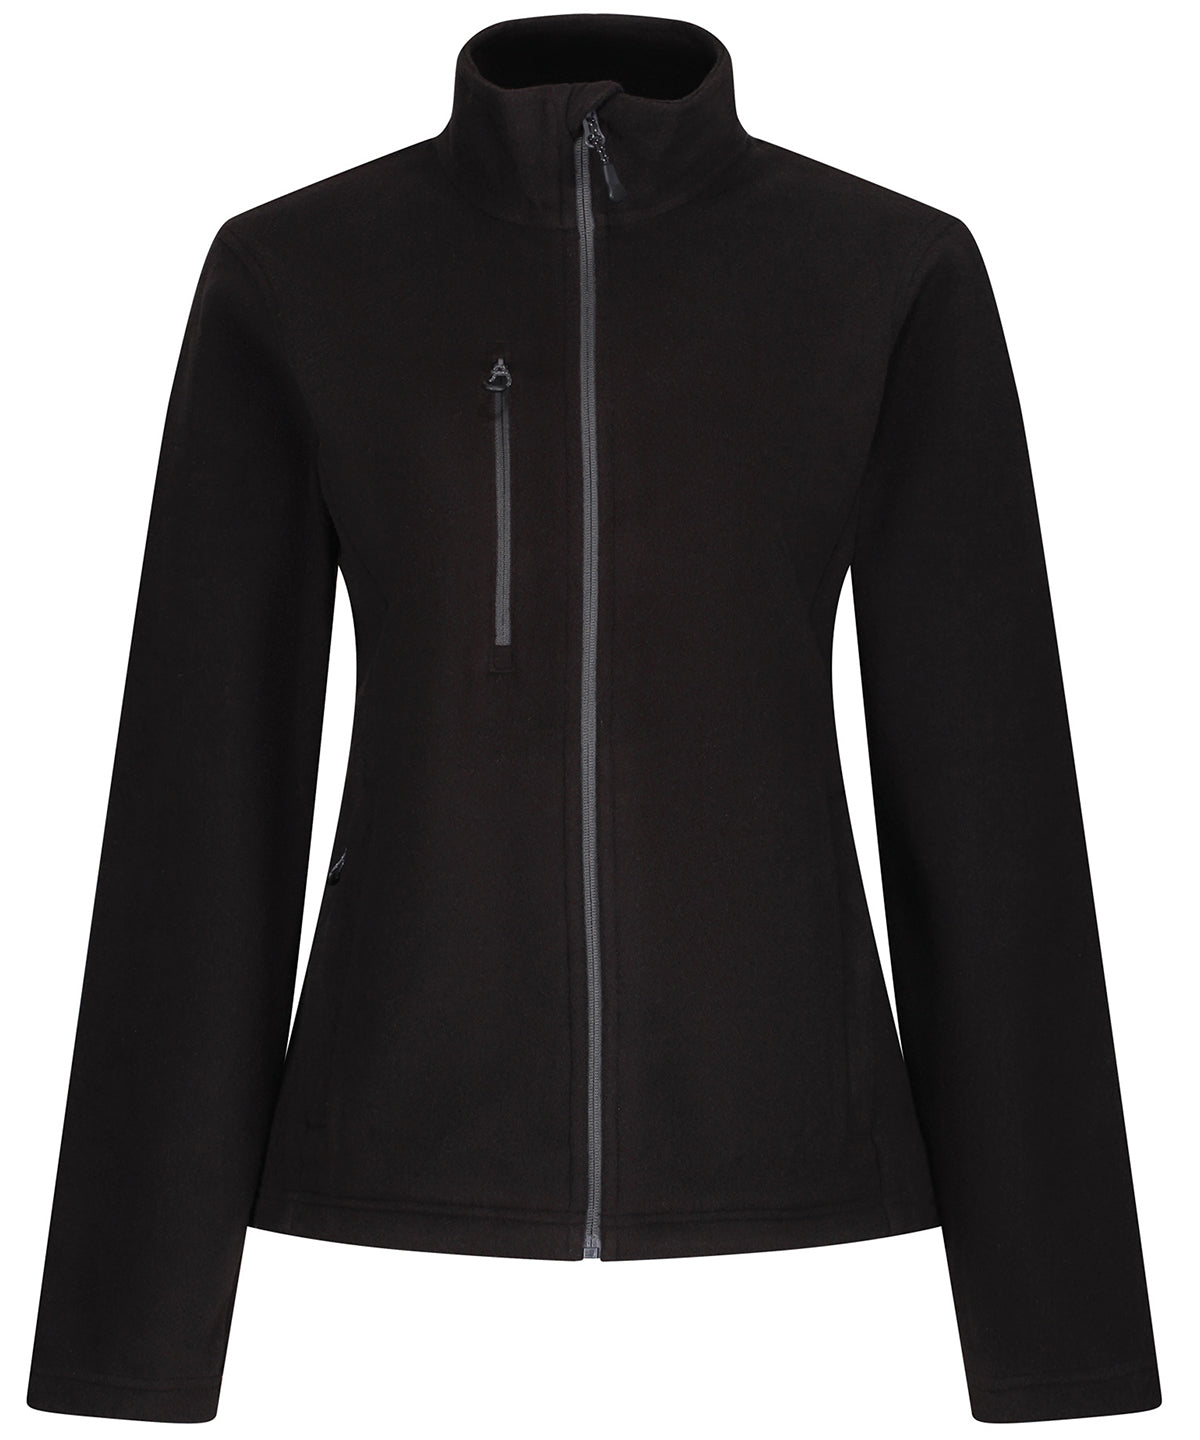 Personalised Jackets - Black Regatta Honestly Made Women's Honestly made recycled full zip fleece